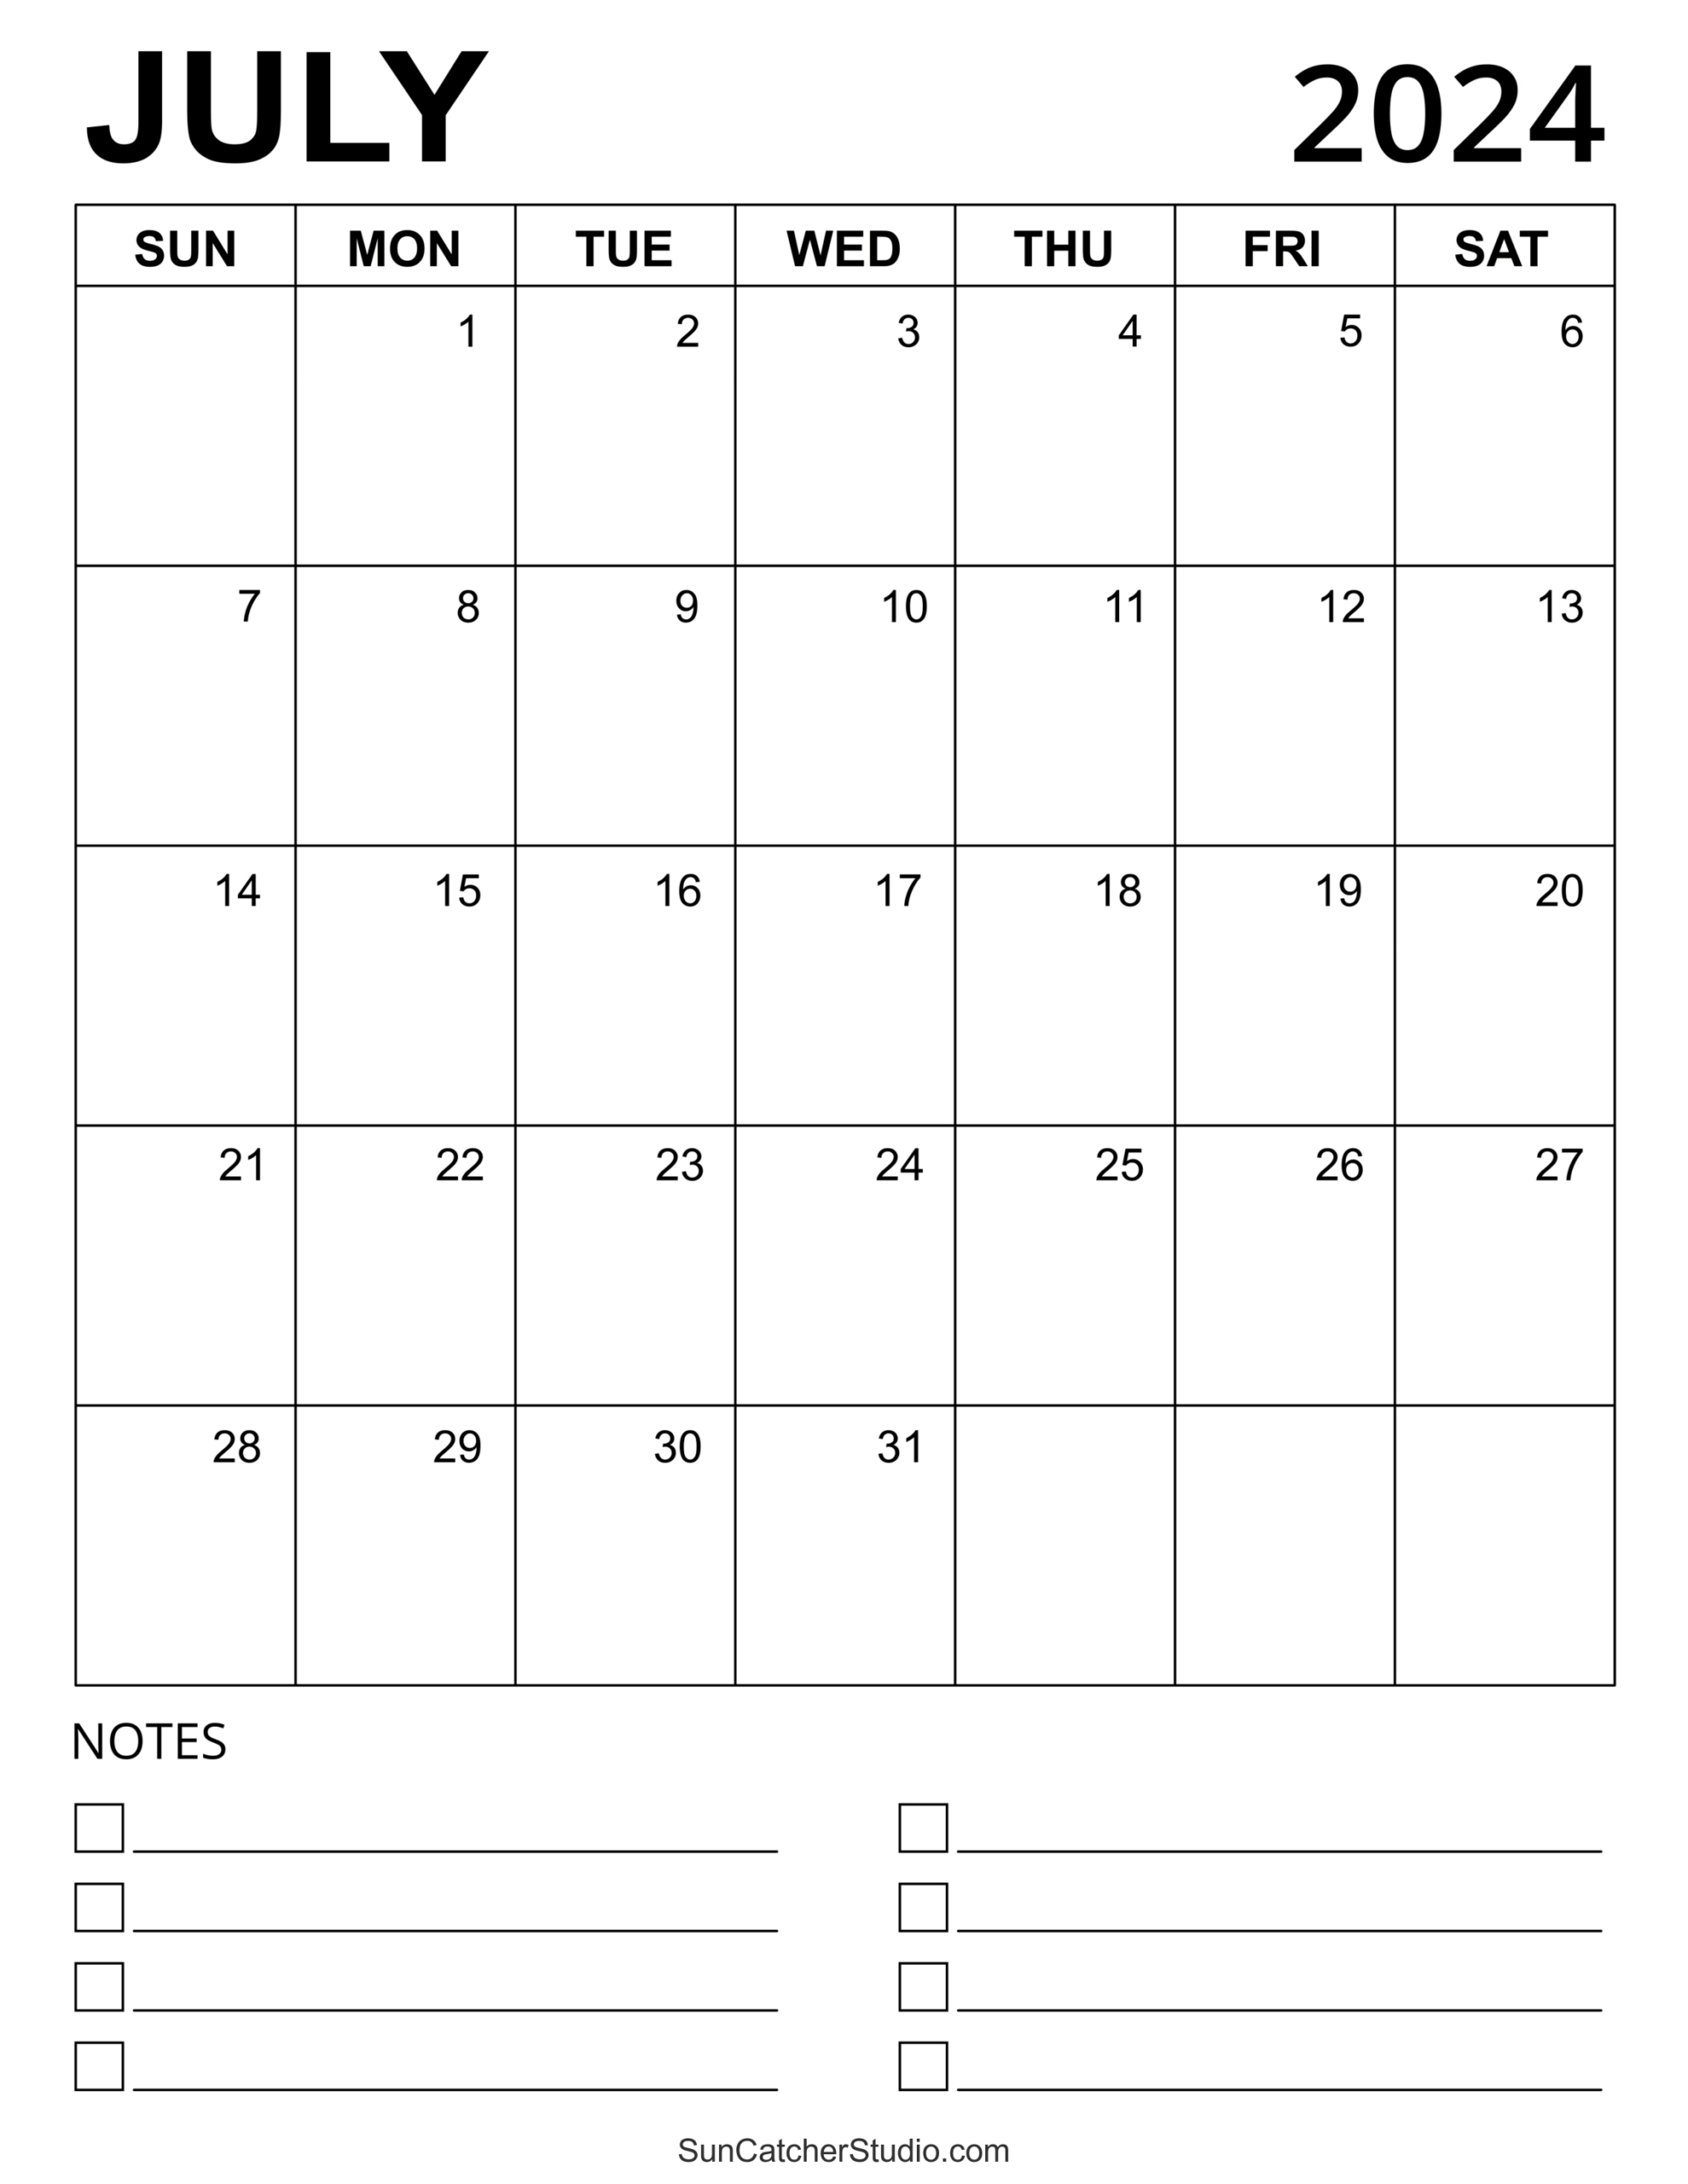 July 2024 Calendar (Free Printable) – Diy Projects, Patterns within Calendar July 2024 With Notes